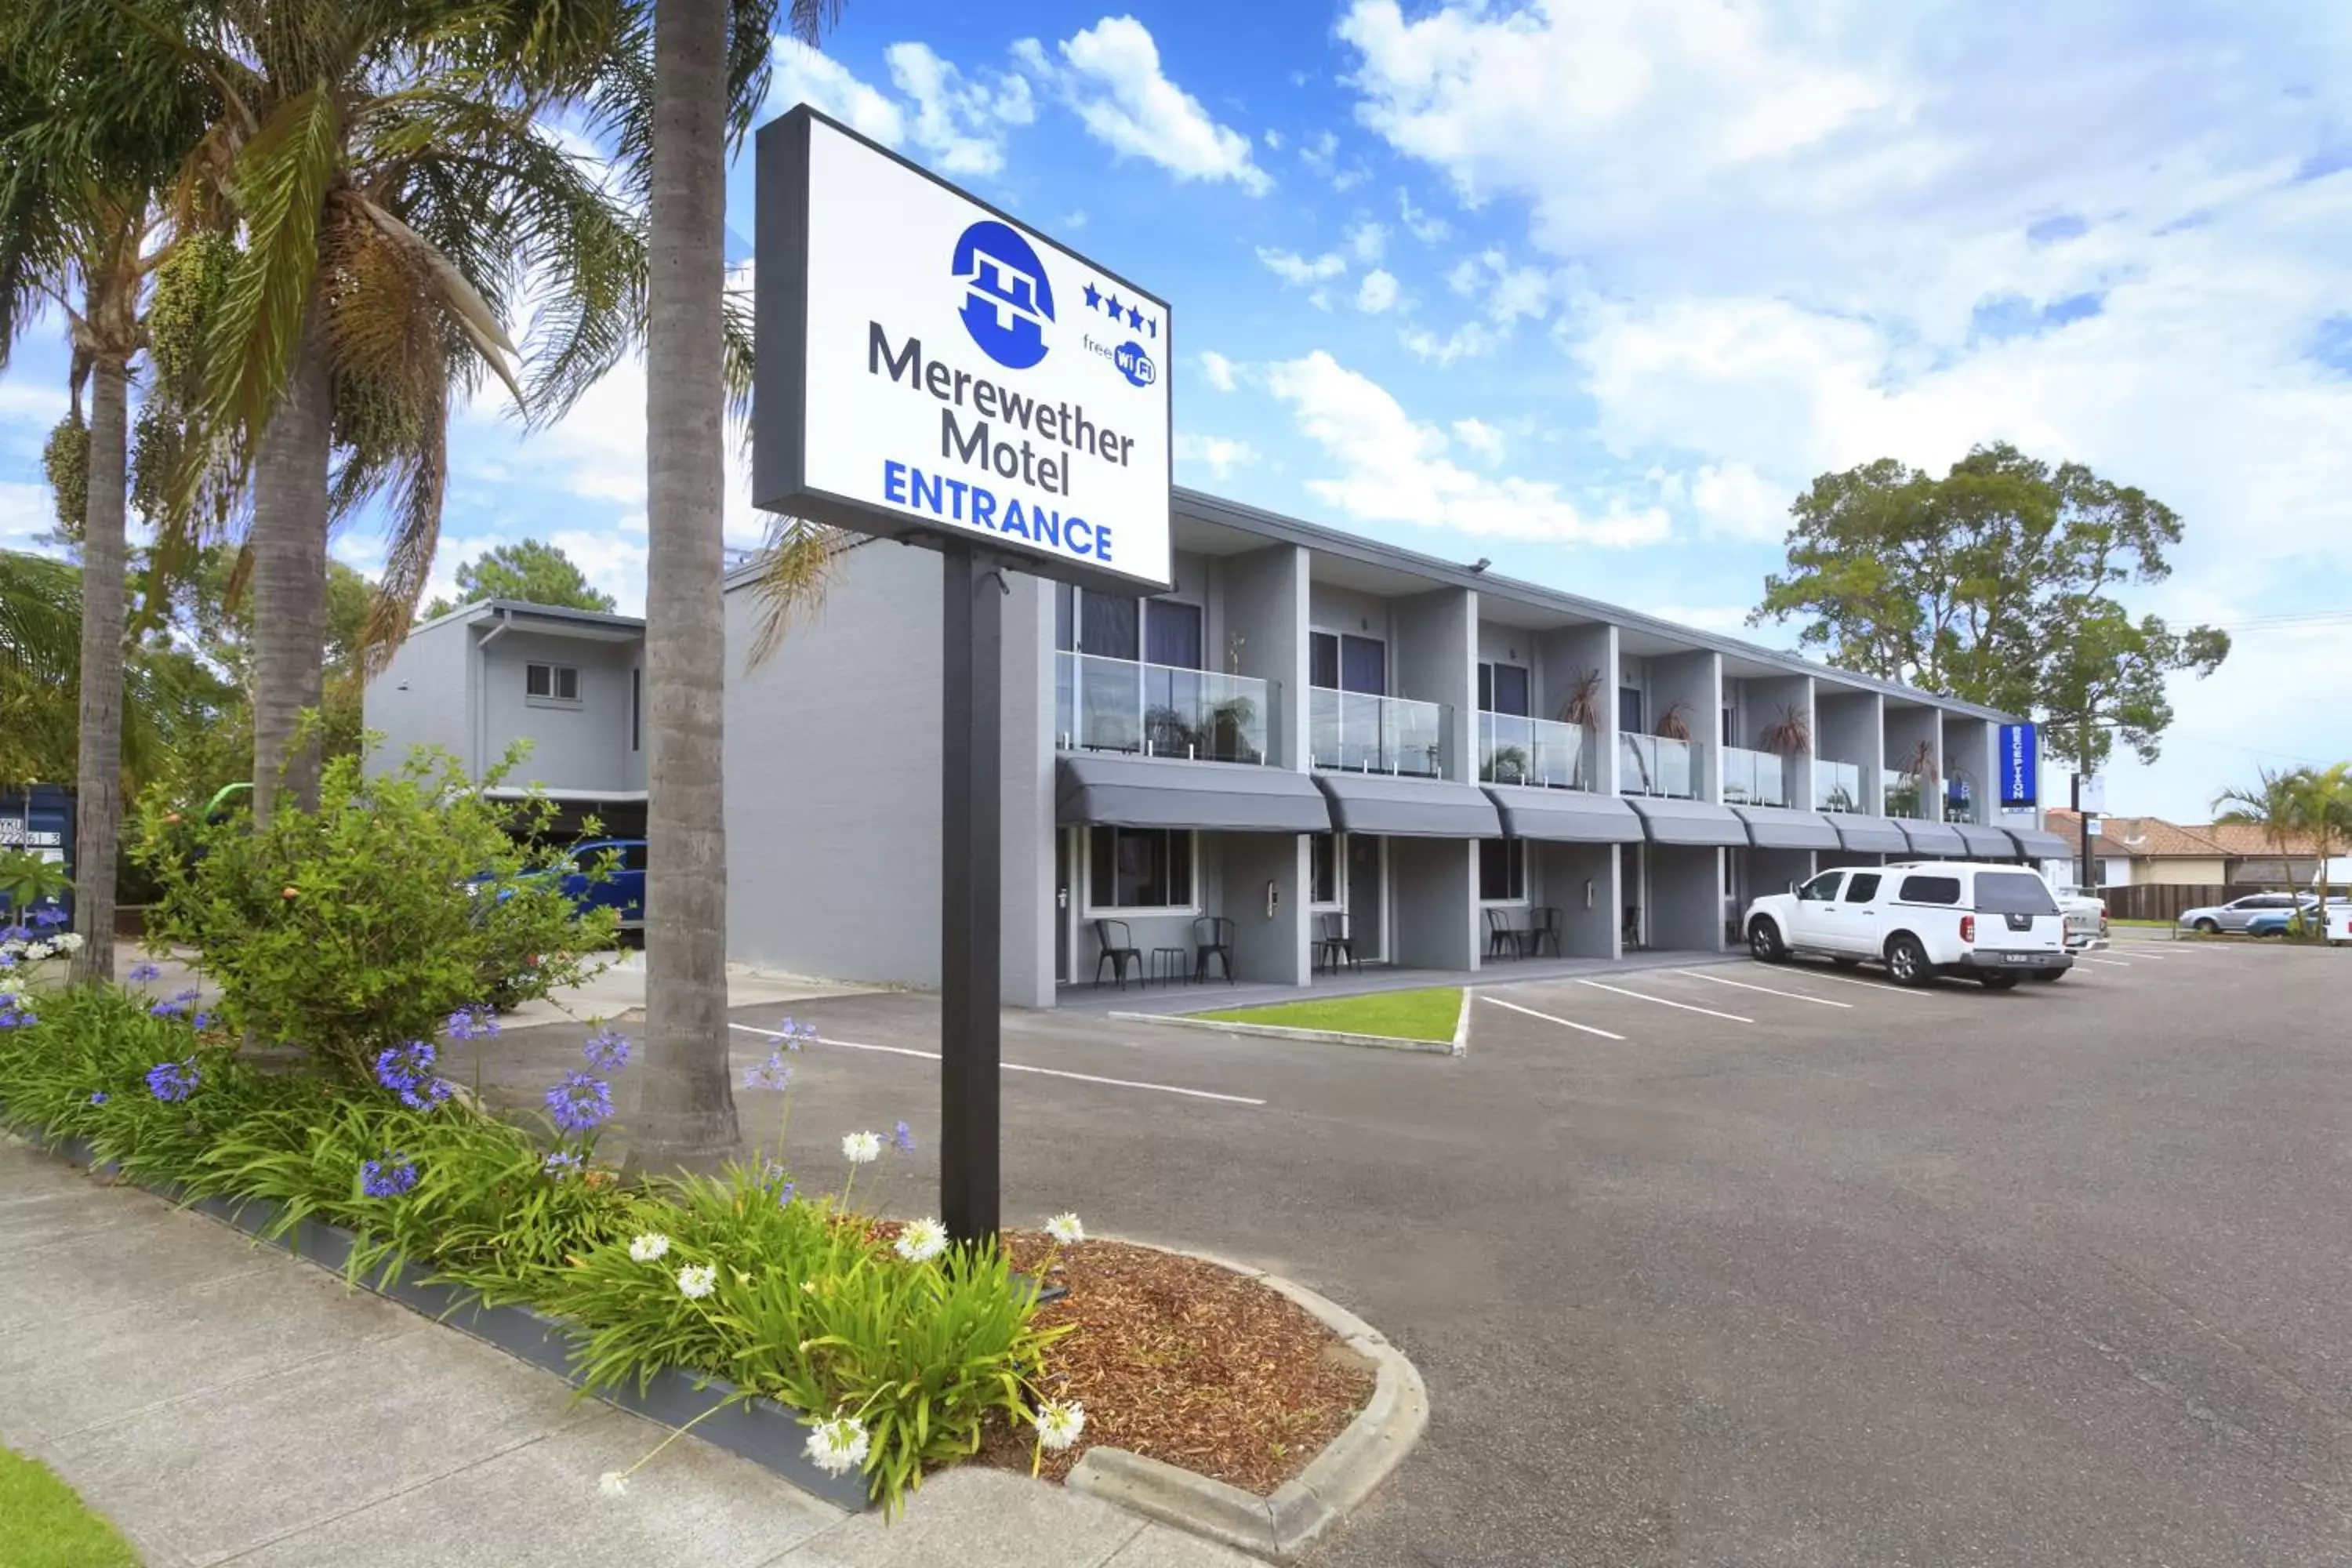 Property Building in Merewether Motel